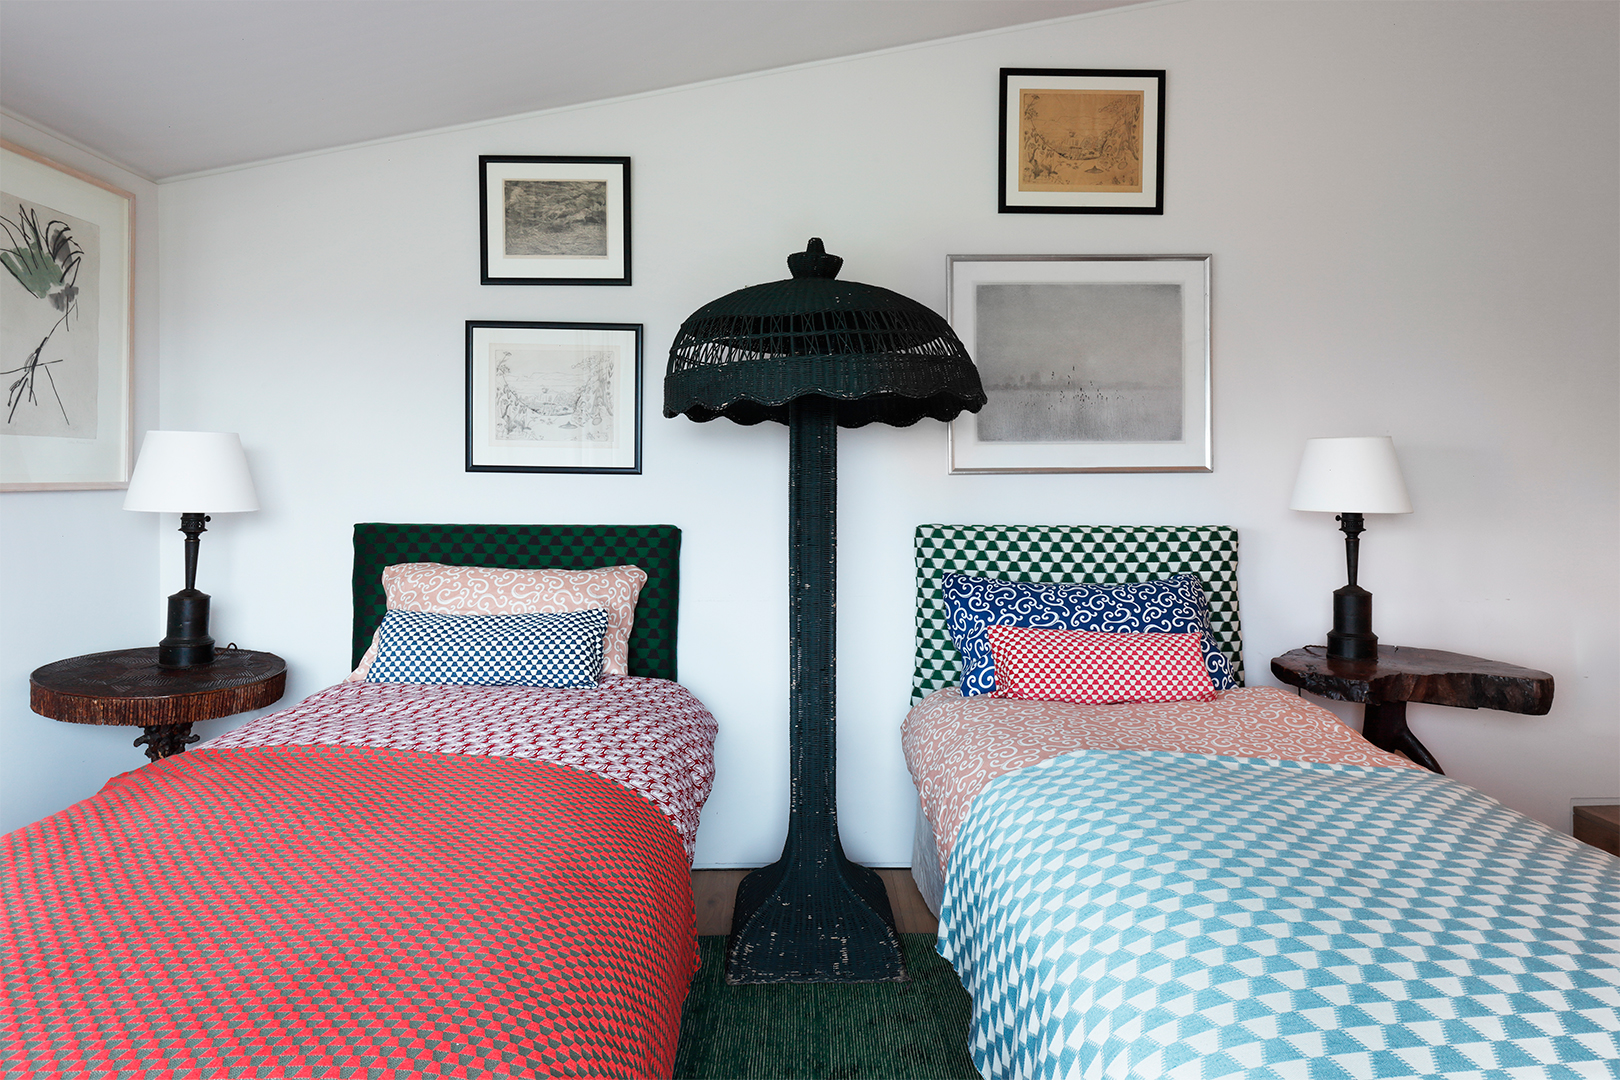 Two beds with mixed-and-matched bedding